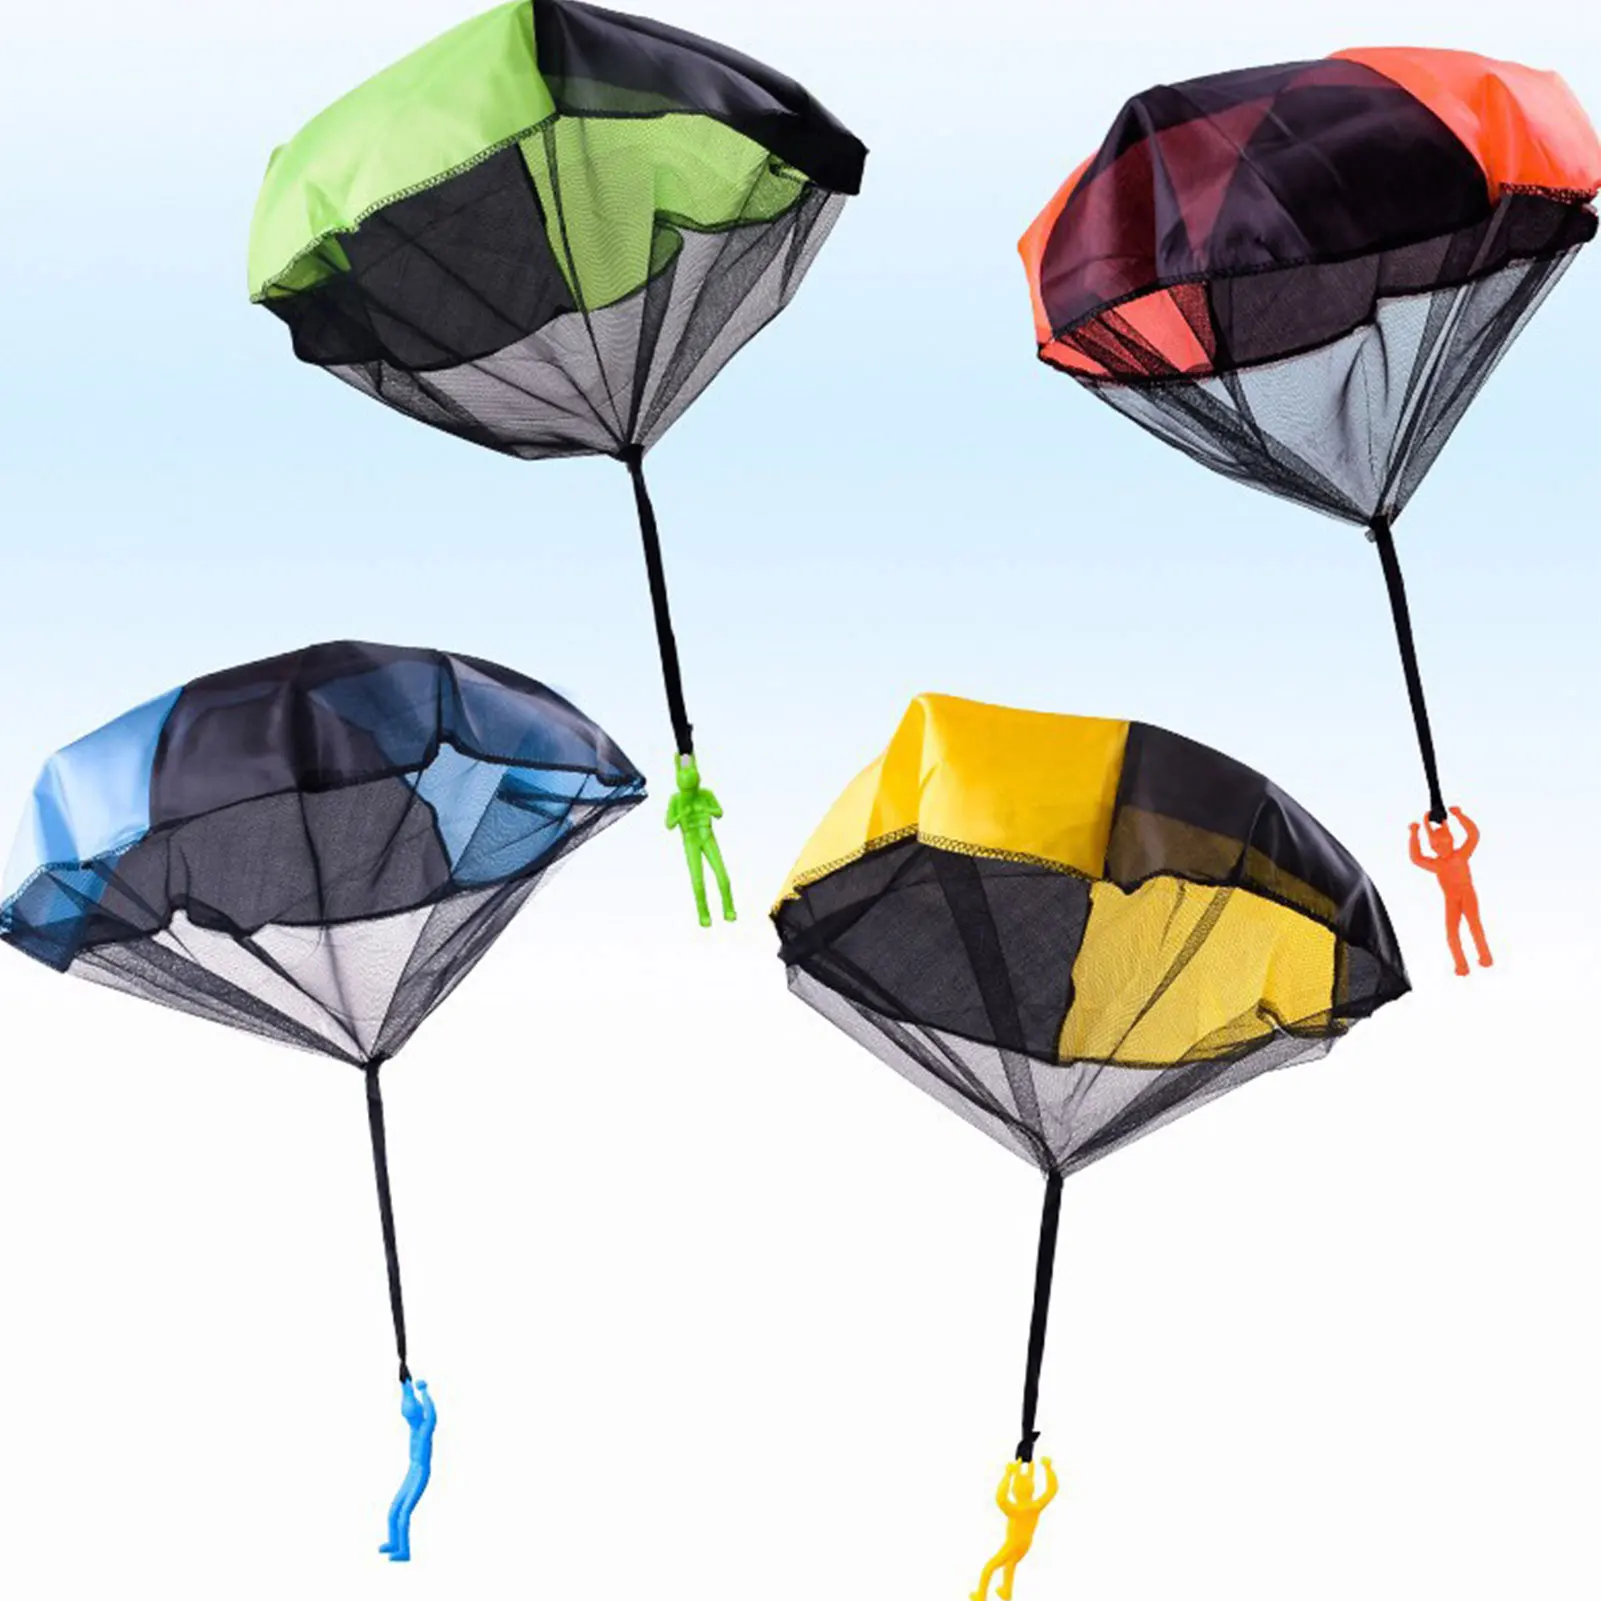 B bangcool 4PCS Kids Parachute Toy Funny Creative Flying Toy Outdoor Play Toy Throwing Toy 